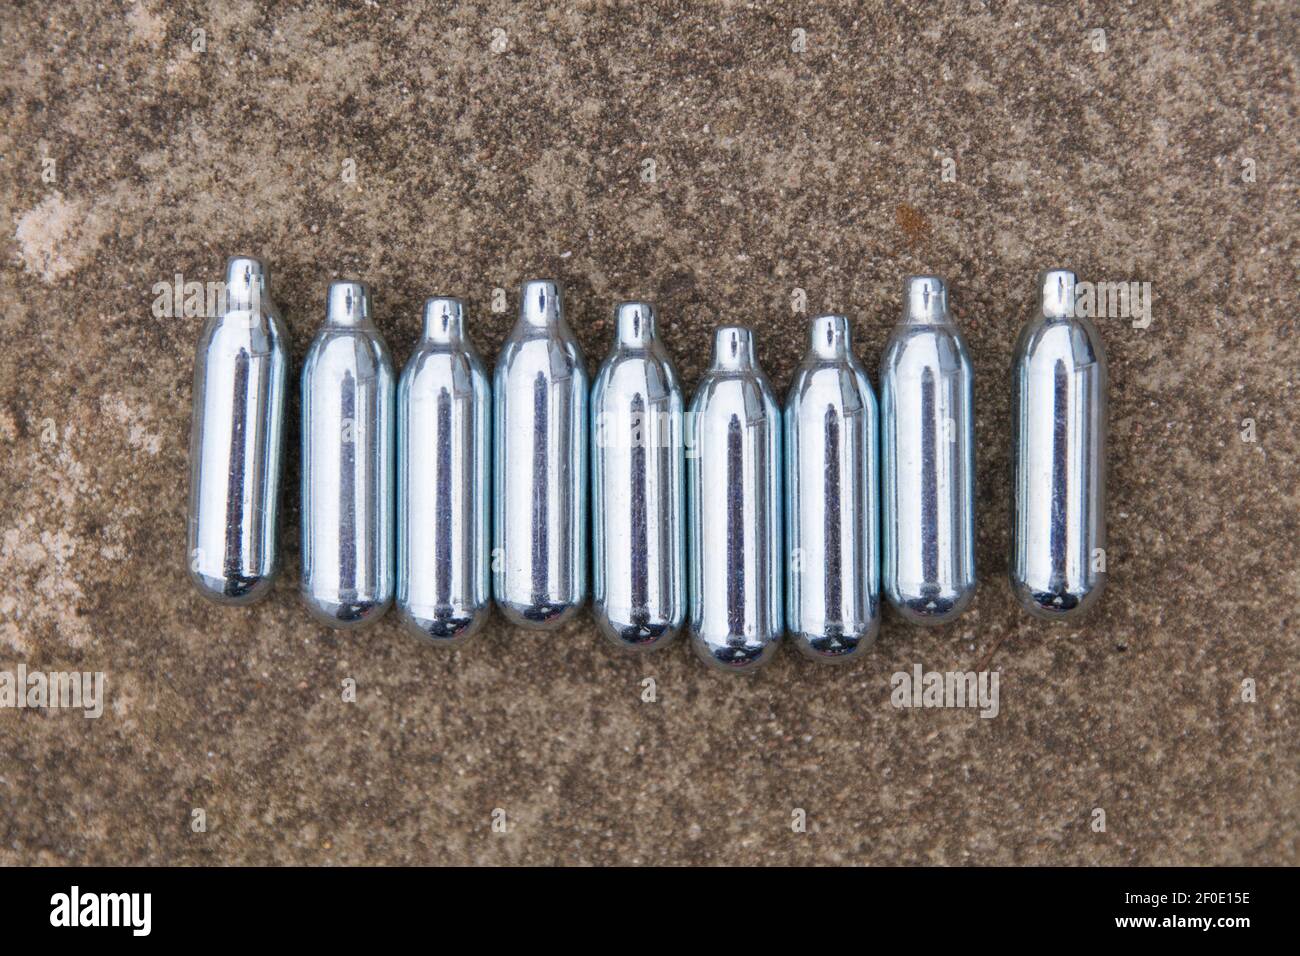 Nitrous oxide metal bulbs or laughing gas recreational drug use Stock Photo